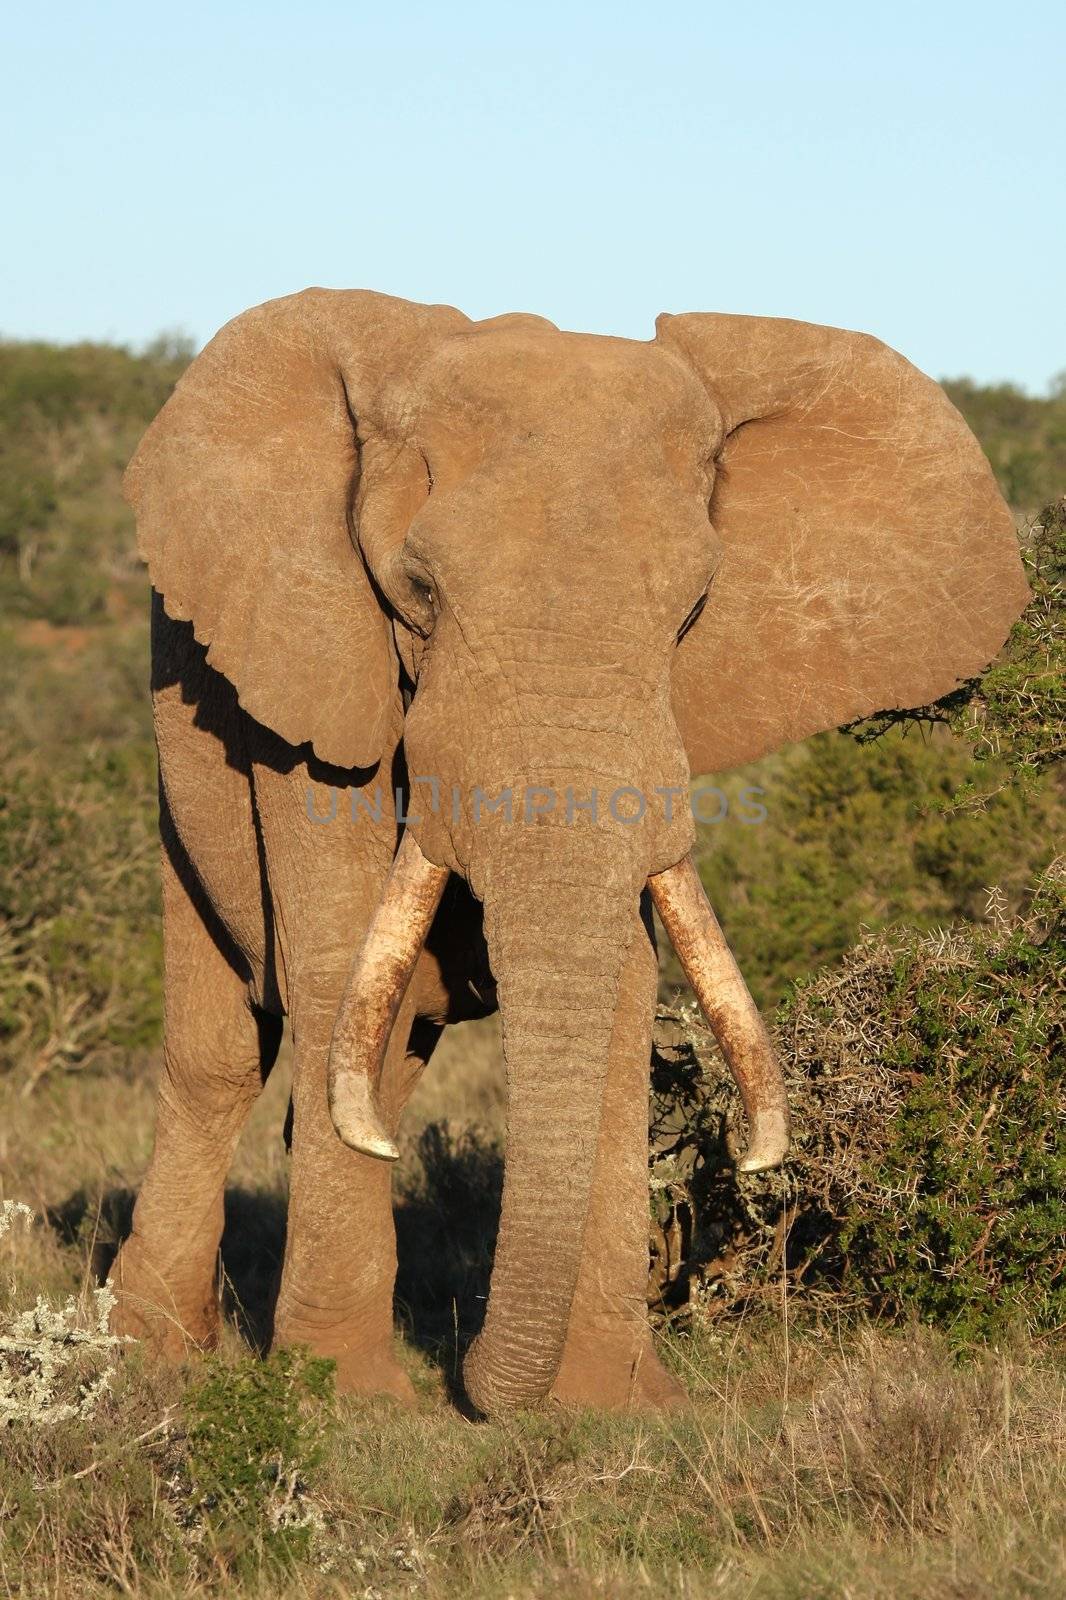 Huge African elephant bull with large tusks and ears spread